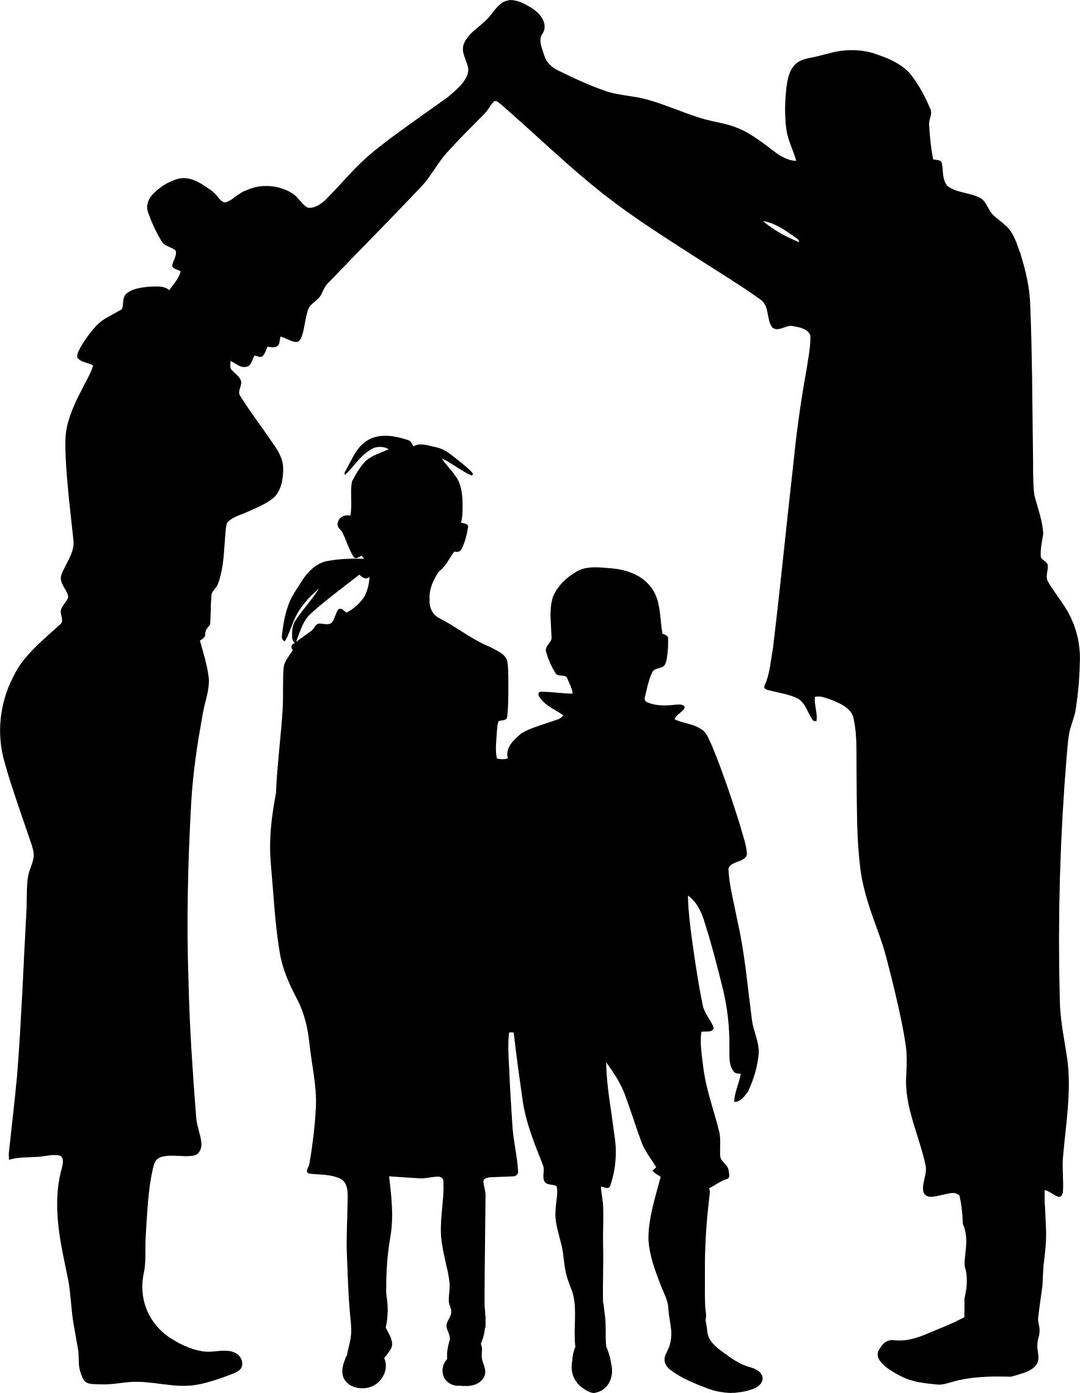 Family Shelter Minus Ground Silhouette png transparent